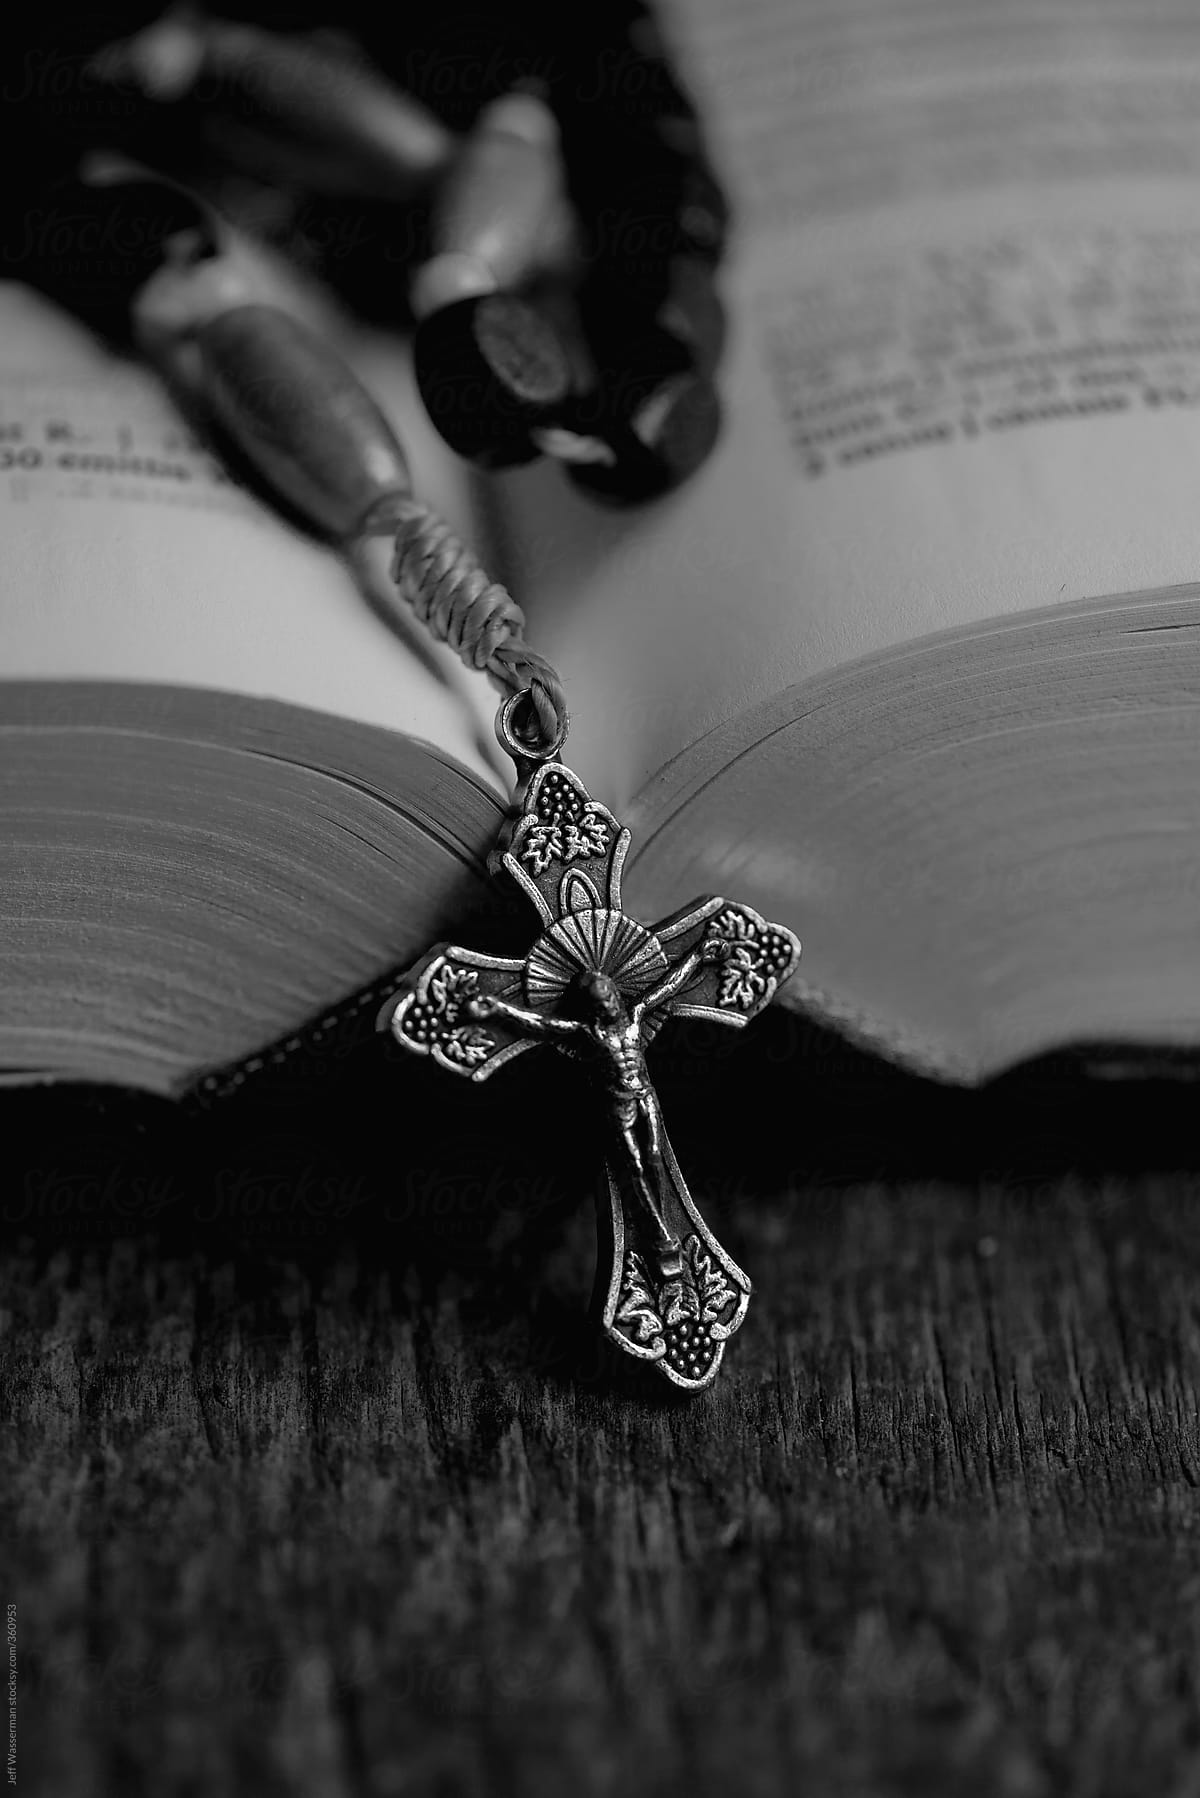 Rosary and Christian Bible Open on Table